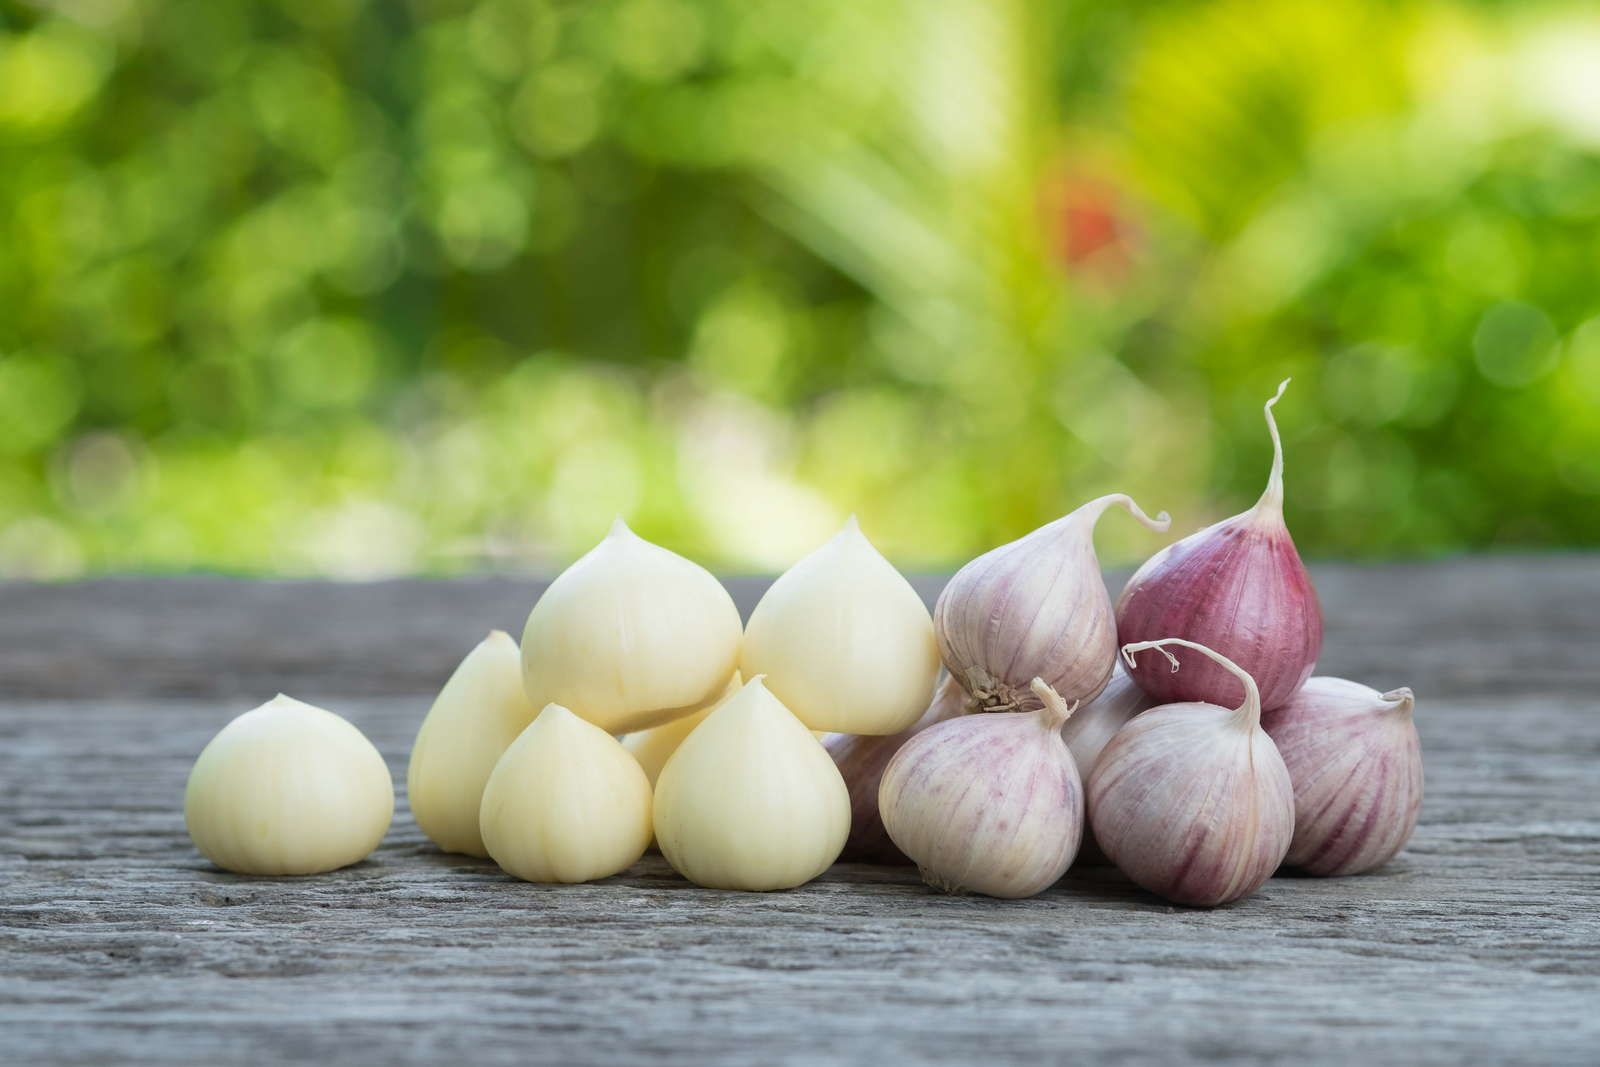 Garlic has miraculous cold prevention properties